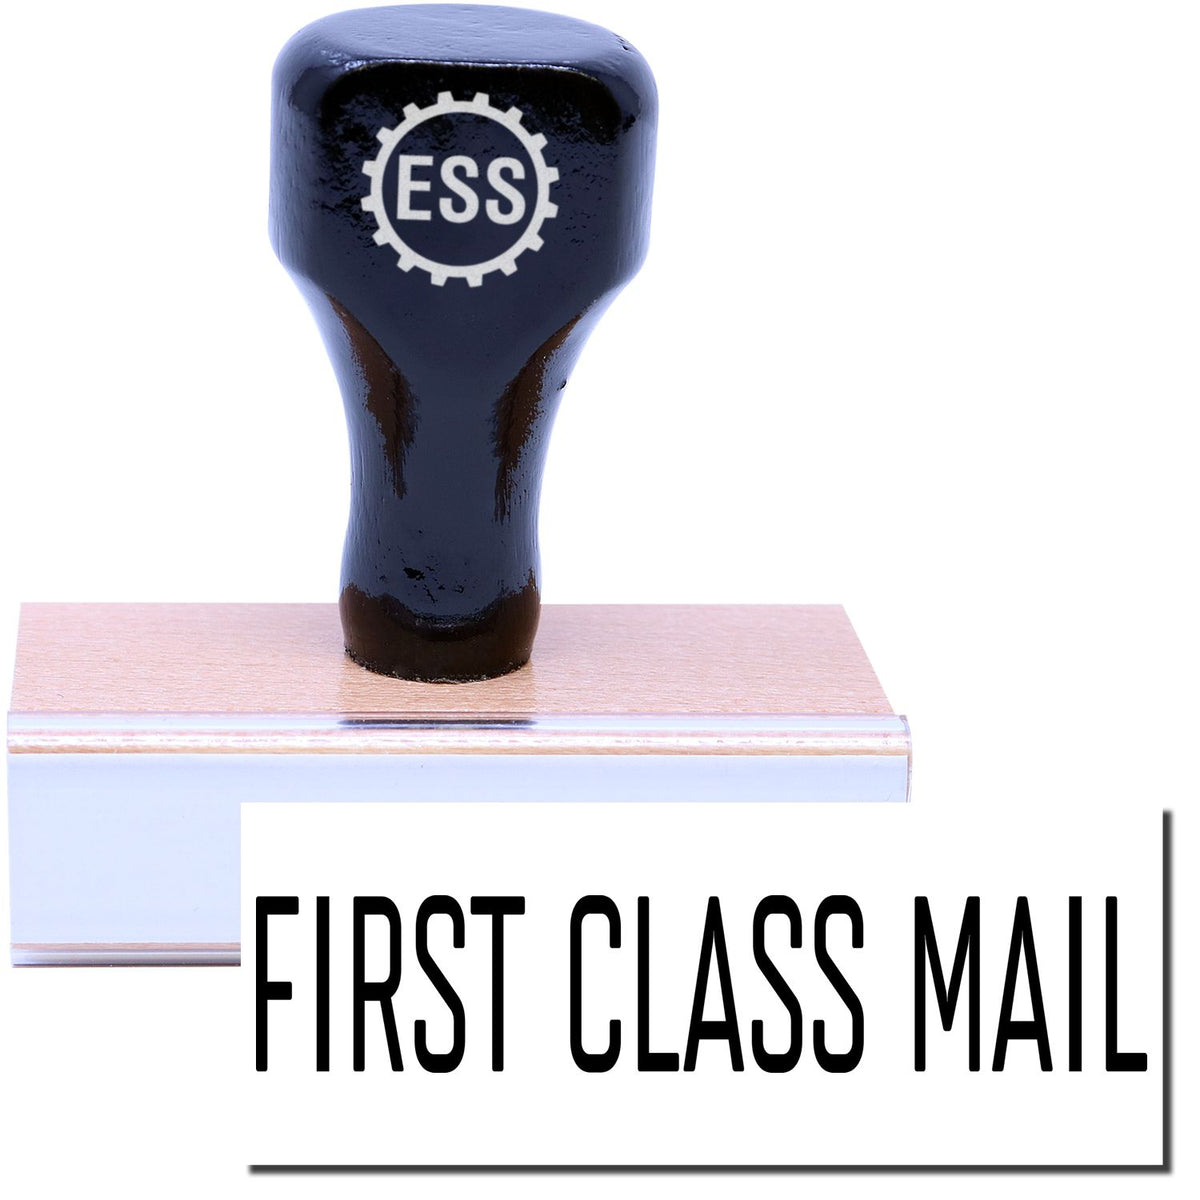 A stock office rubber stamp with a stamped image showing how the text &quot;FIRST CLASS MAIL&quot; in a narrow font is displayed after stamping.